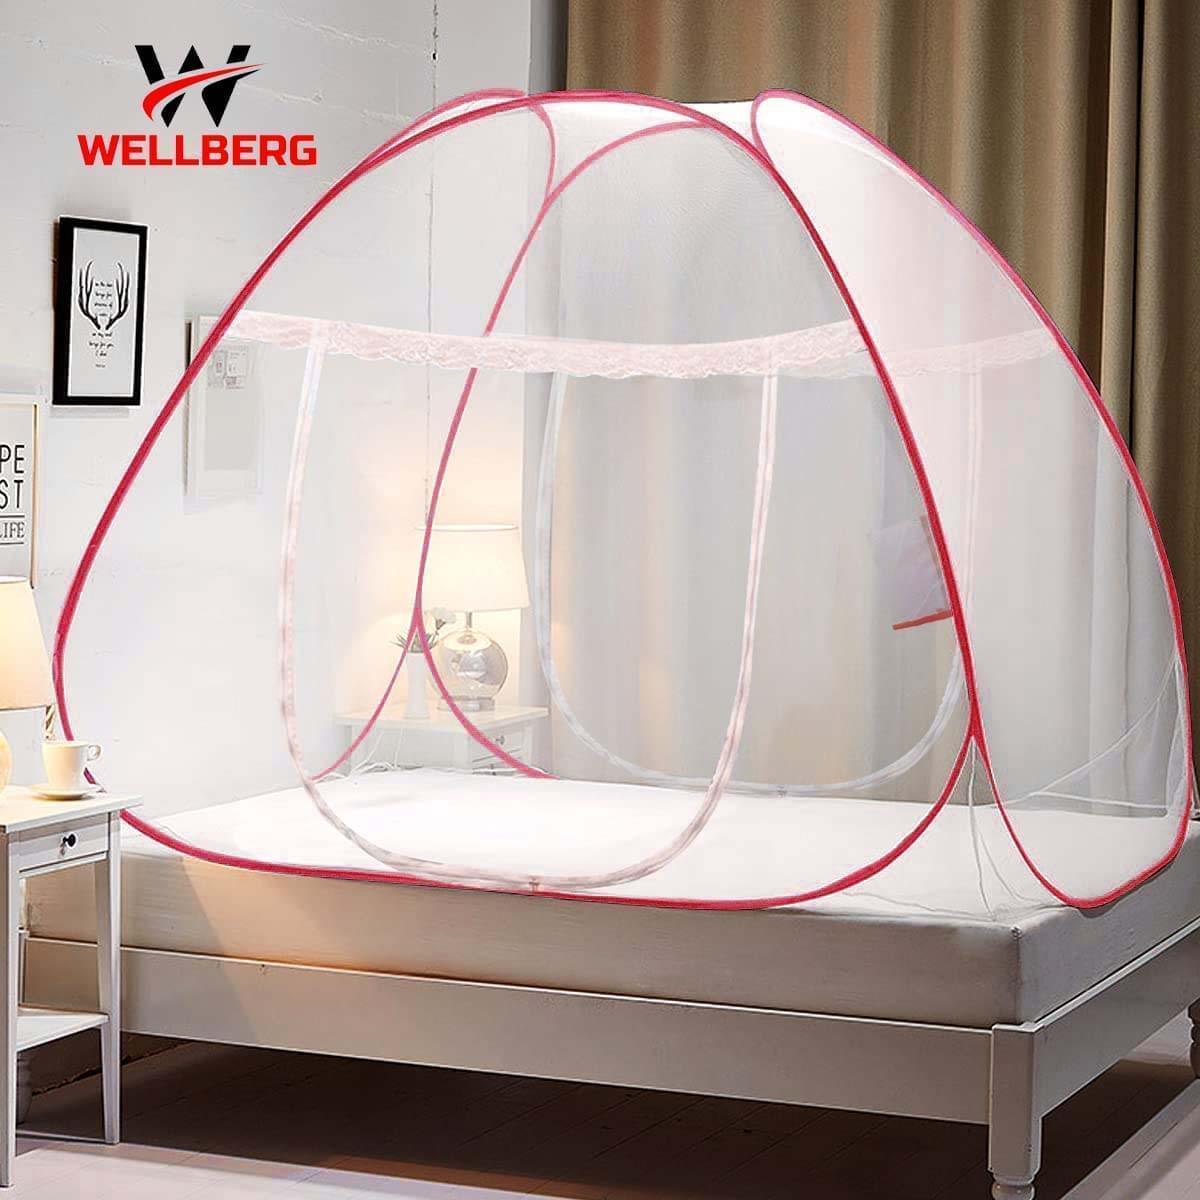 Wellberg Mosquito Net, Double Bed (Queen Size, 24-30 GSM, Foldable, Highly Durable) - Red - WELLBERG